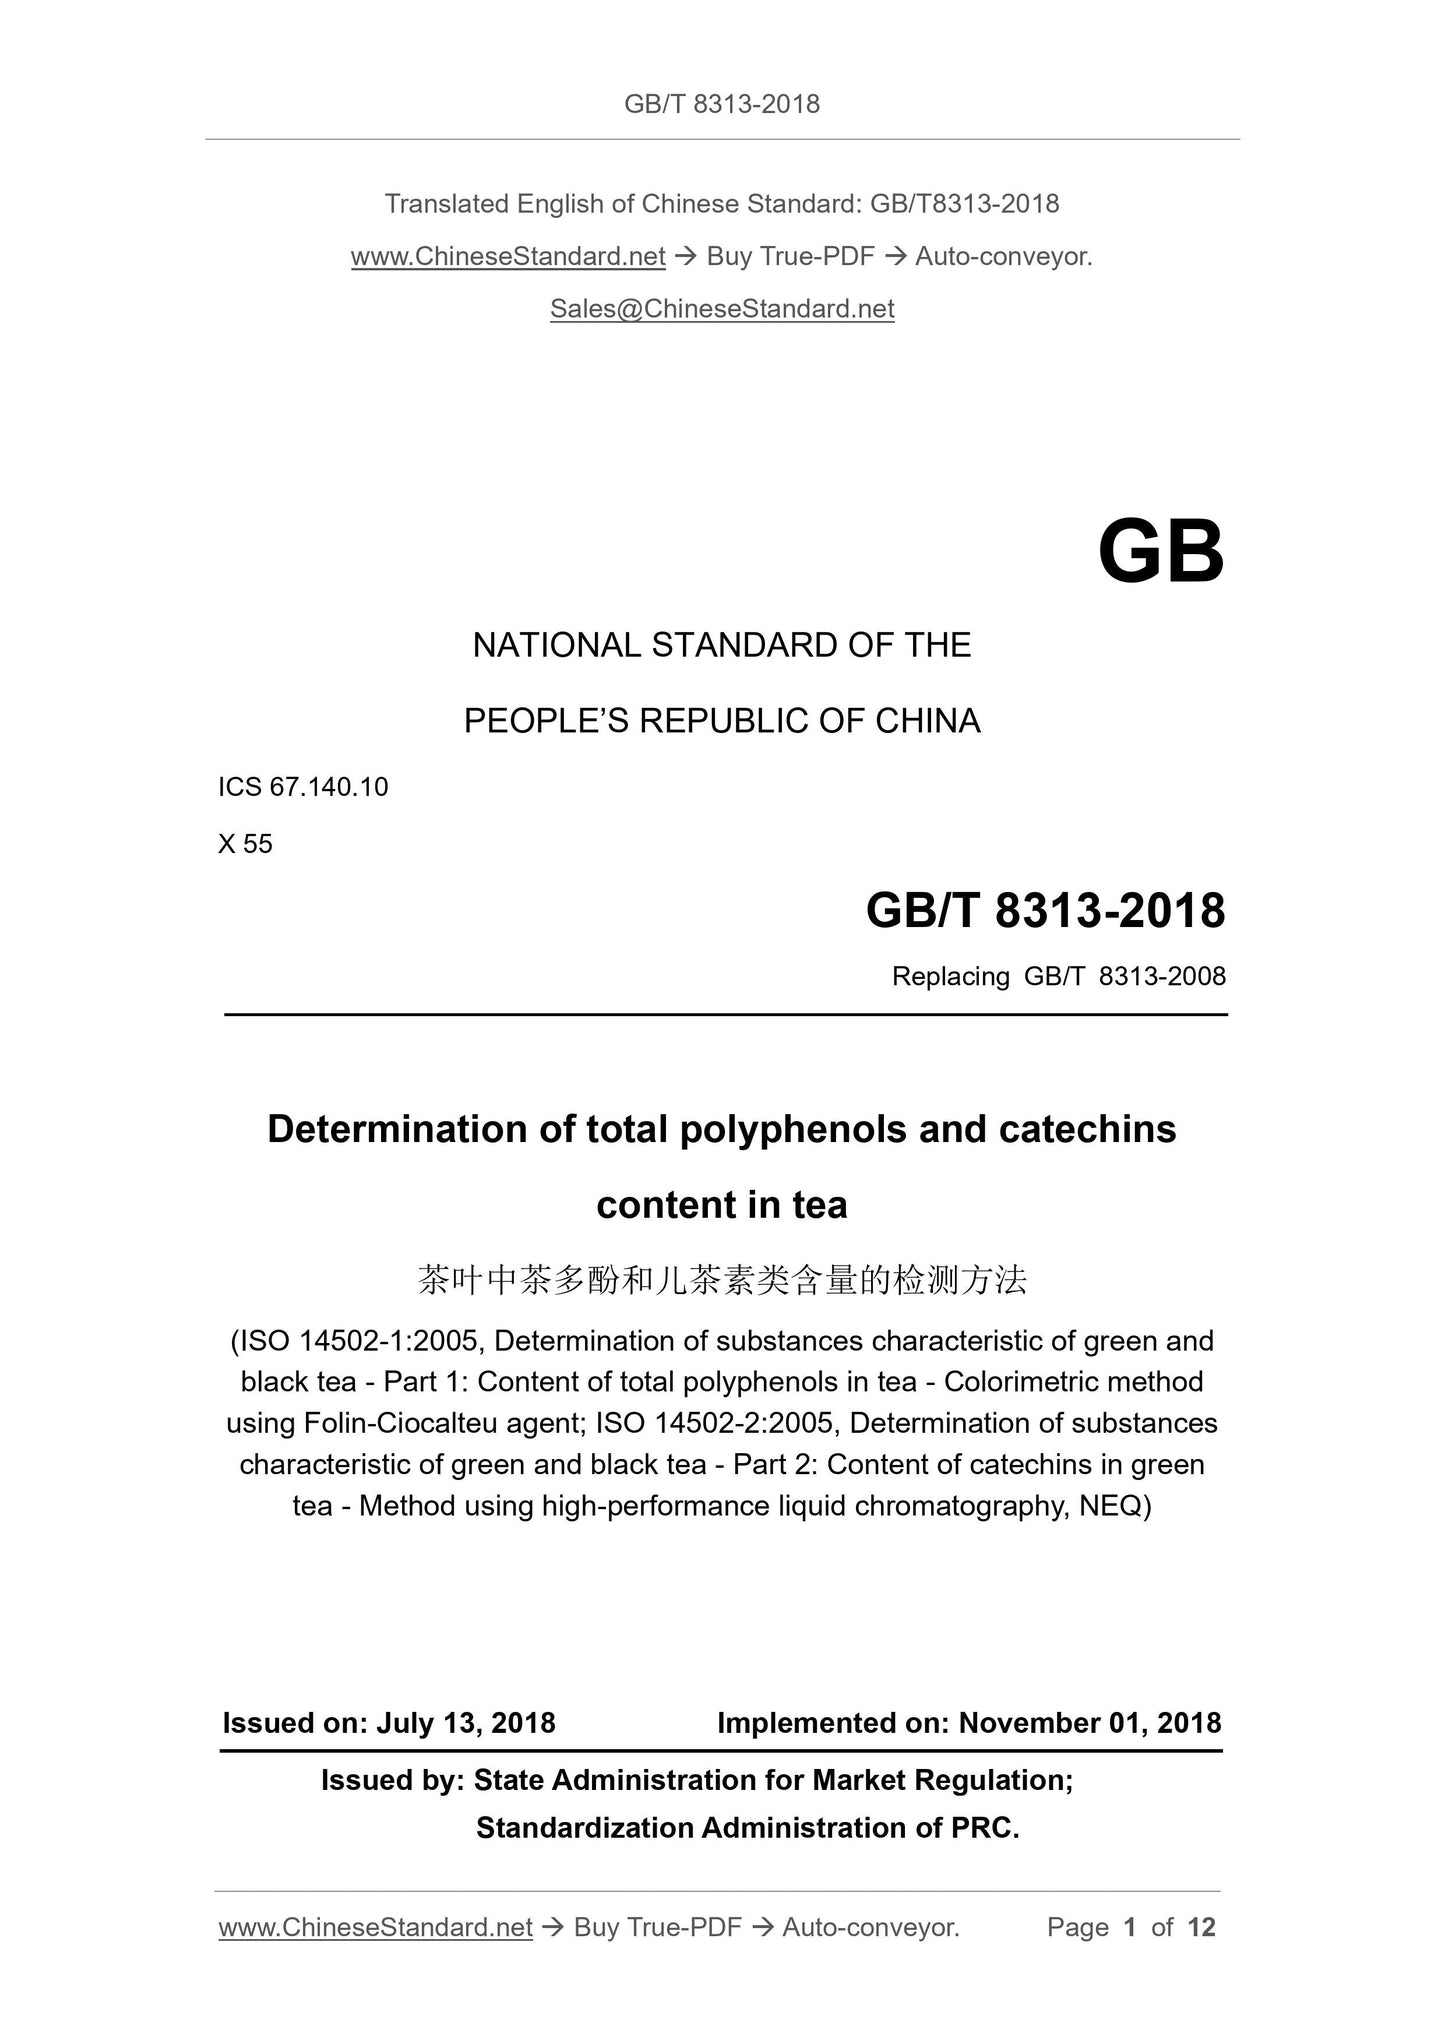 GB/T 8313-2018 Page 1